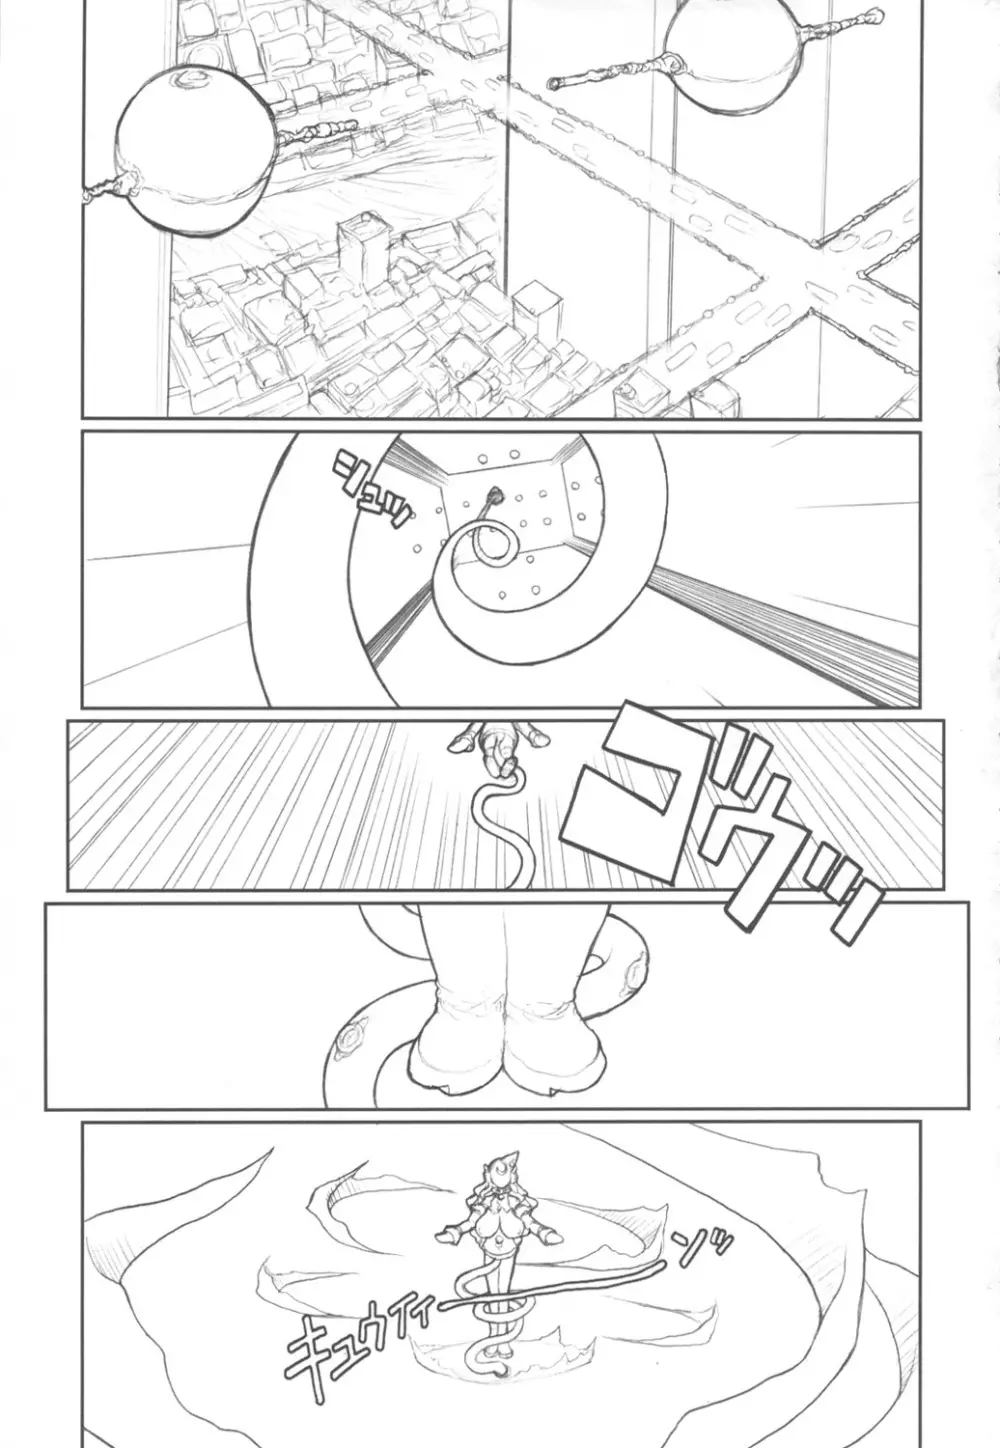 MaD ArtistS FuturE - page2